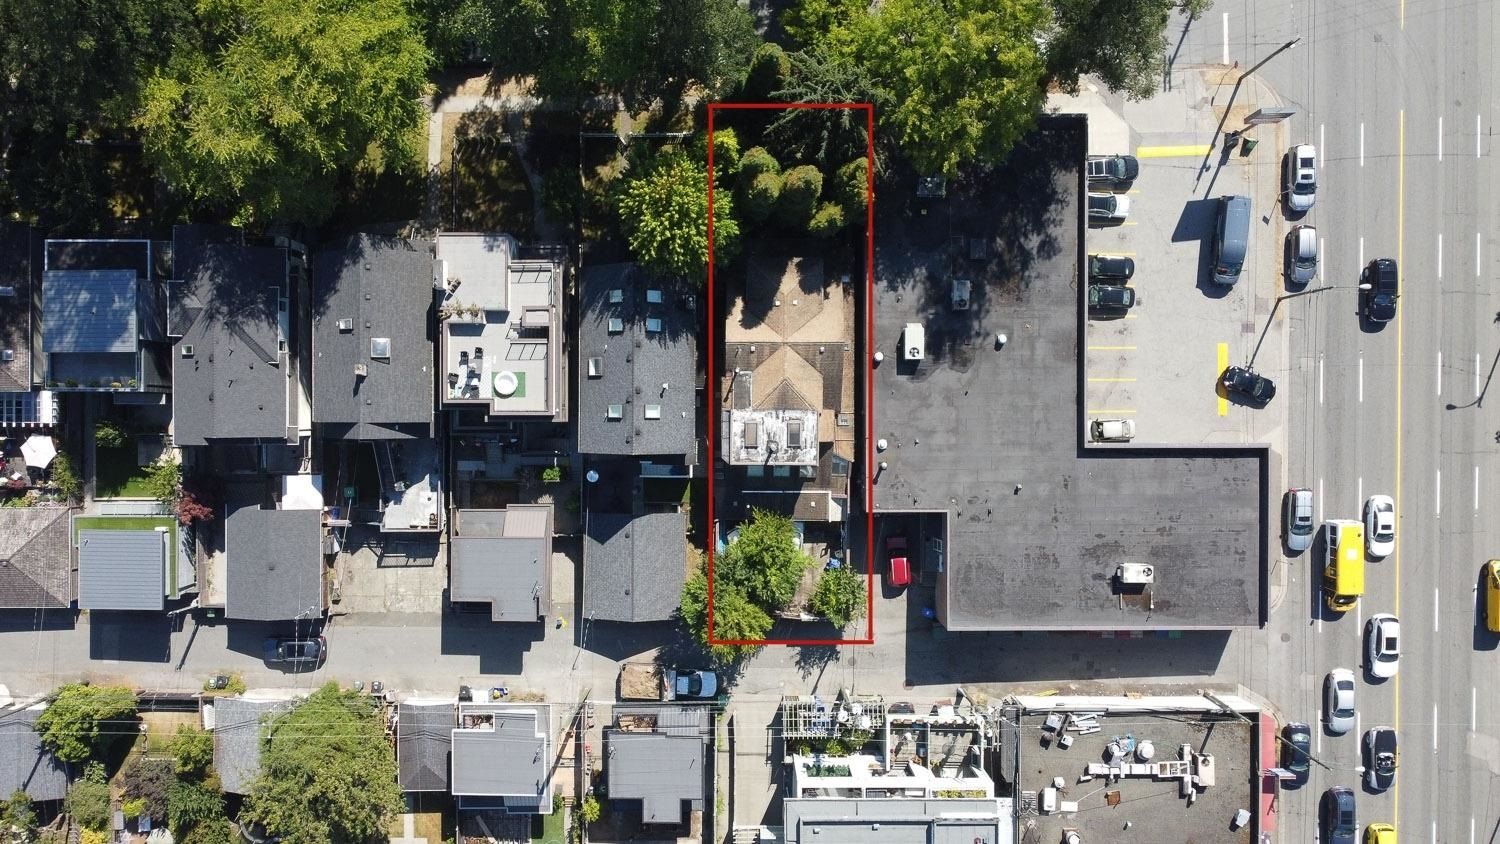 Main Photo: 989 W 23RD Avenue in Vancouver: Cambie Business with Property for sale (Vancouver West)  : MLS®# C8046976